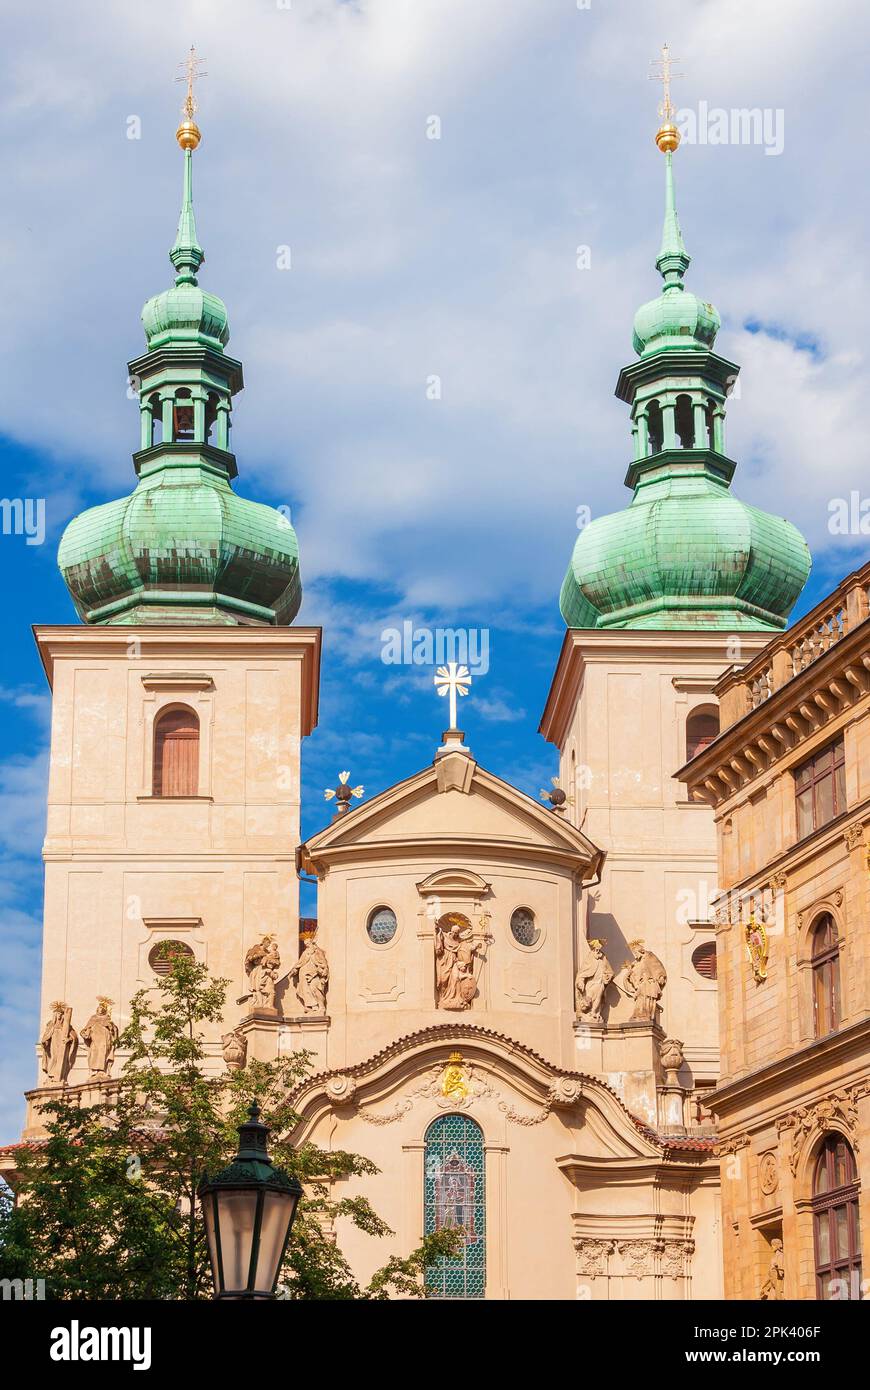 Baroque art and architecture in Prague. 18th century Church of St Havel with onion dome twin bell towers Stock Photo